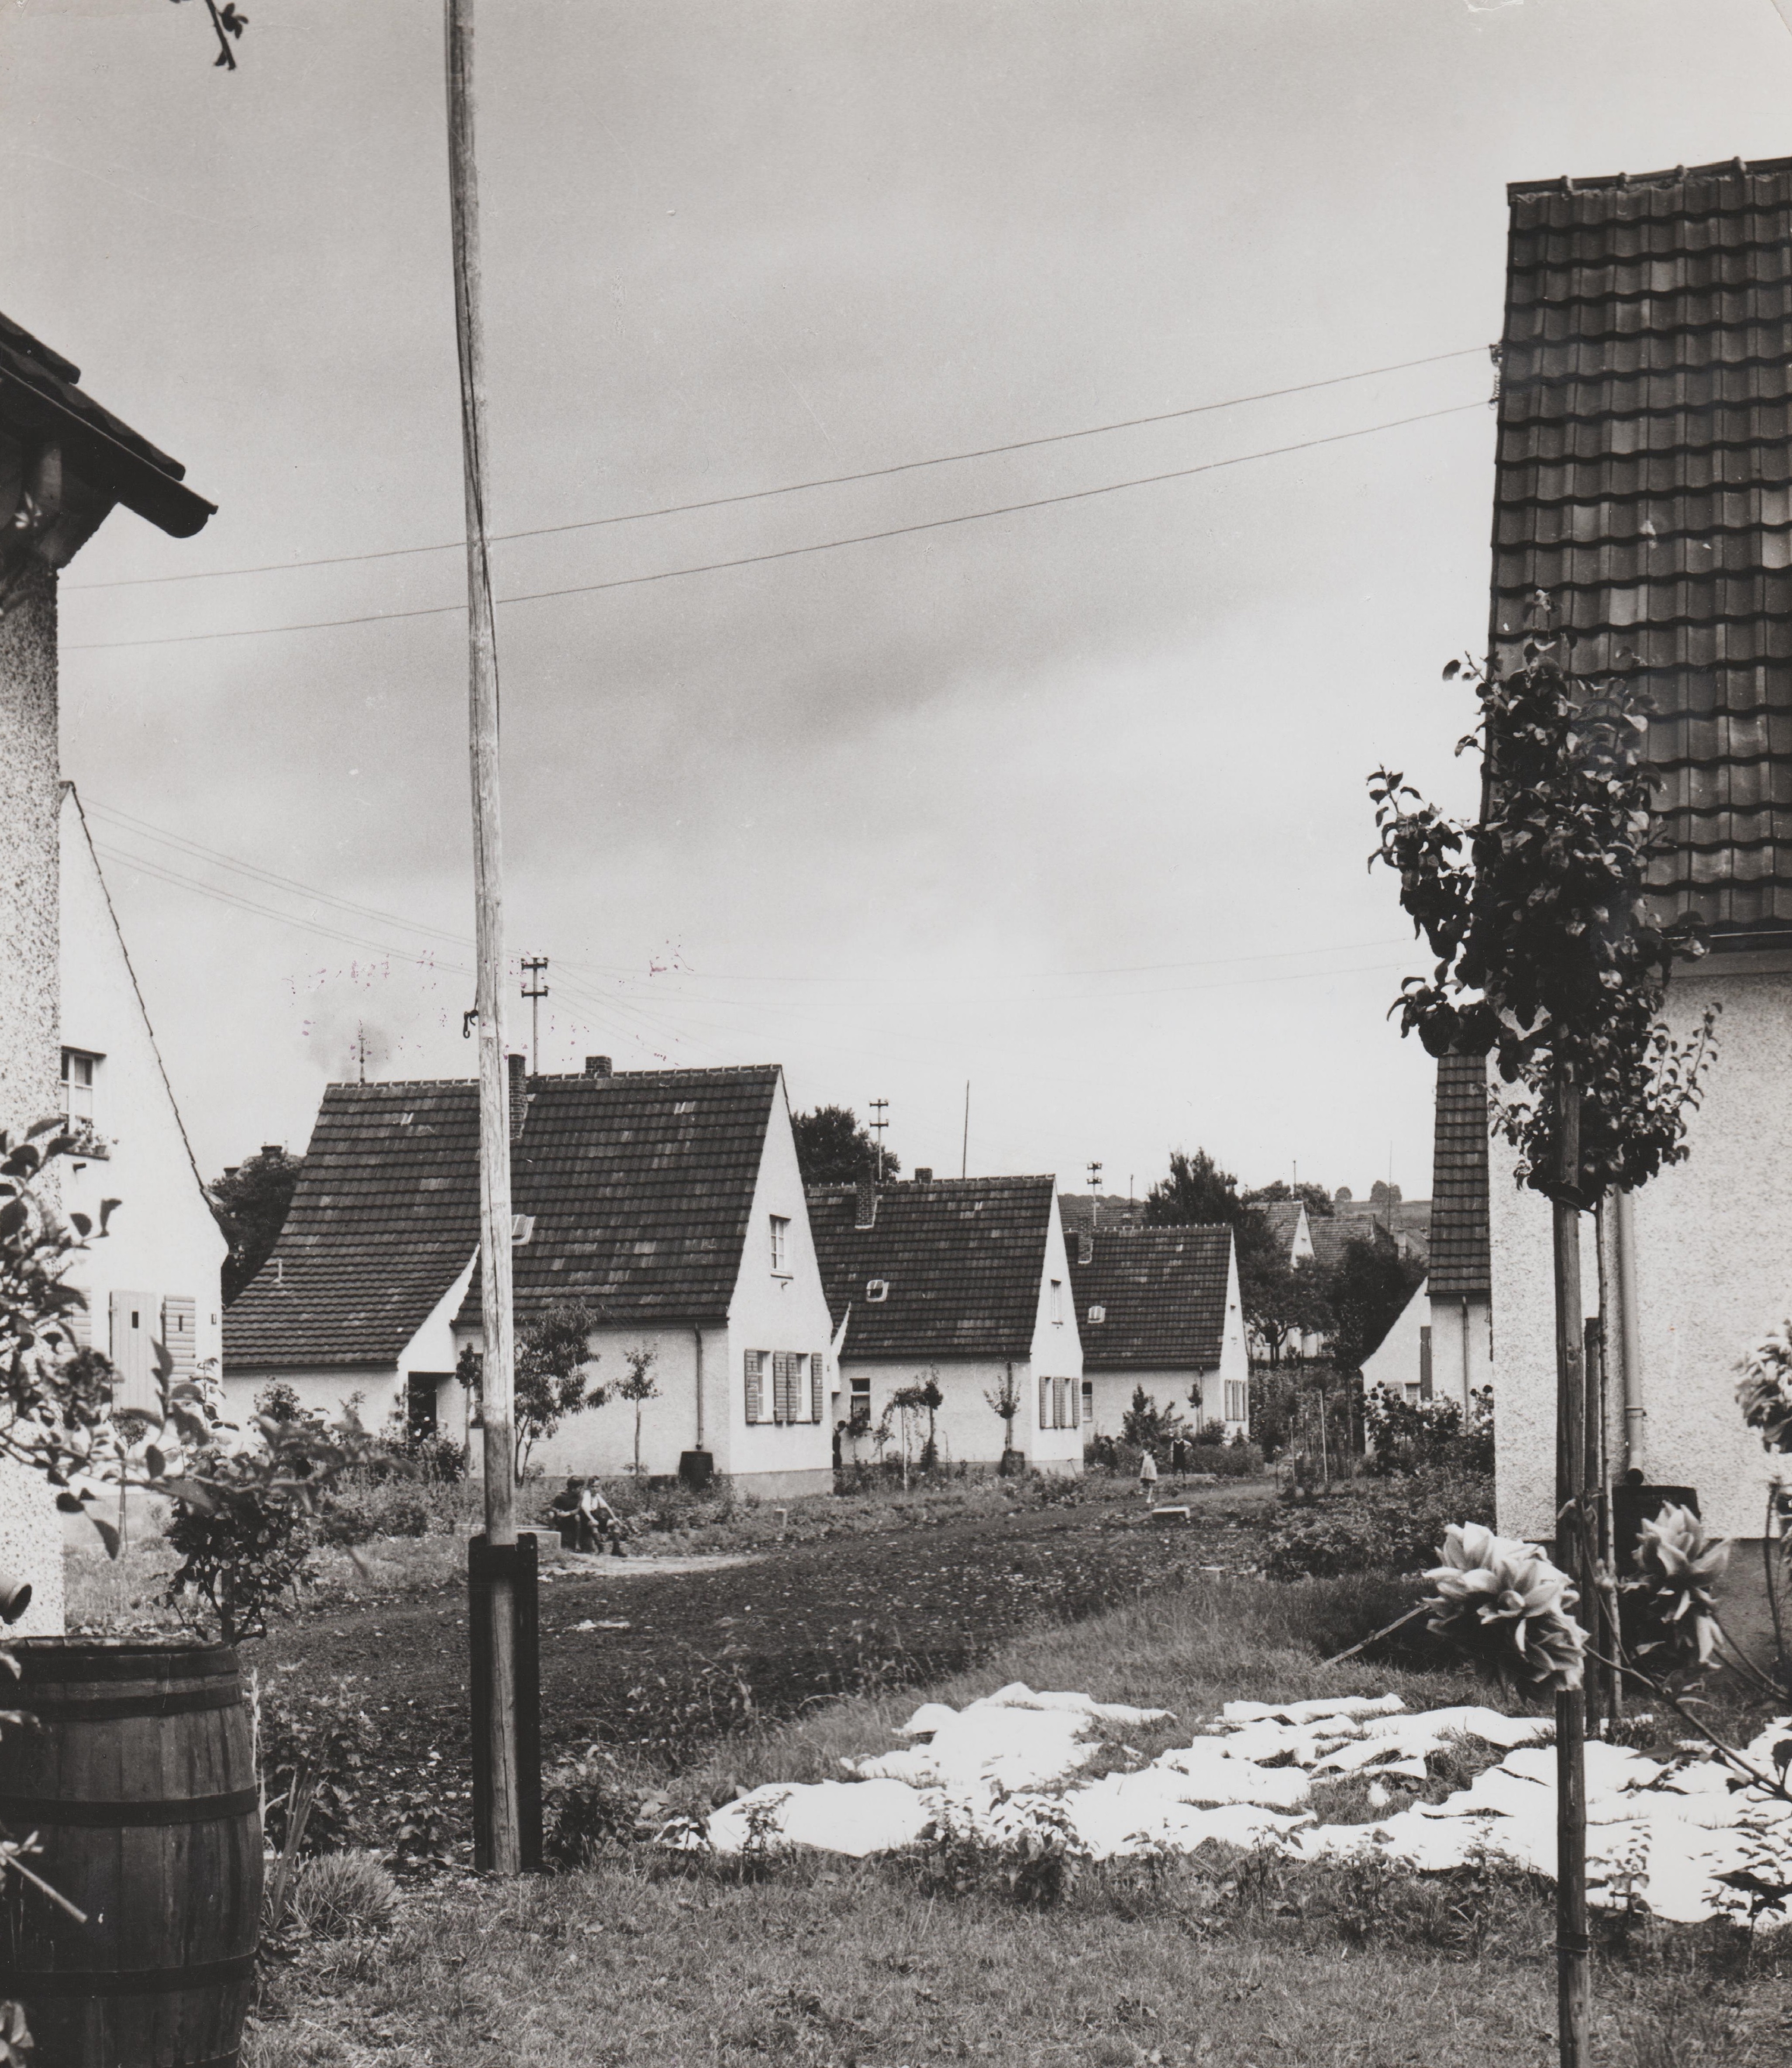 Kastell-Siedlung in Bendorf 1936/37 (REM CC BY-NC-SA)